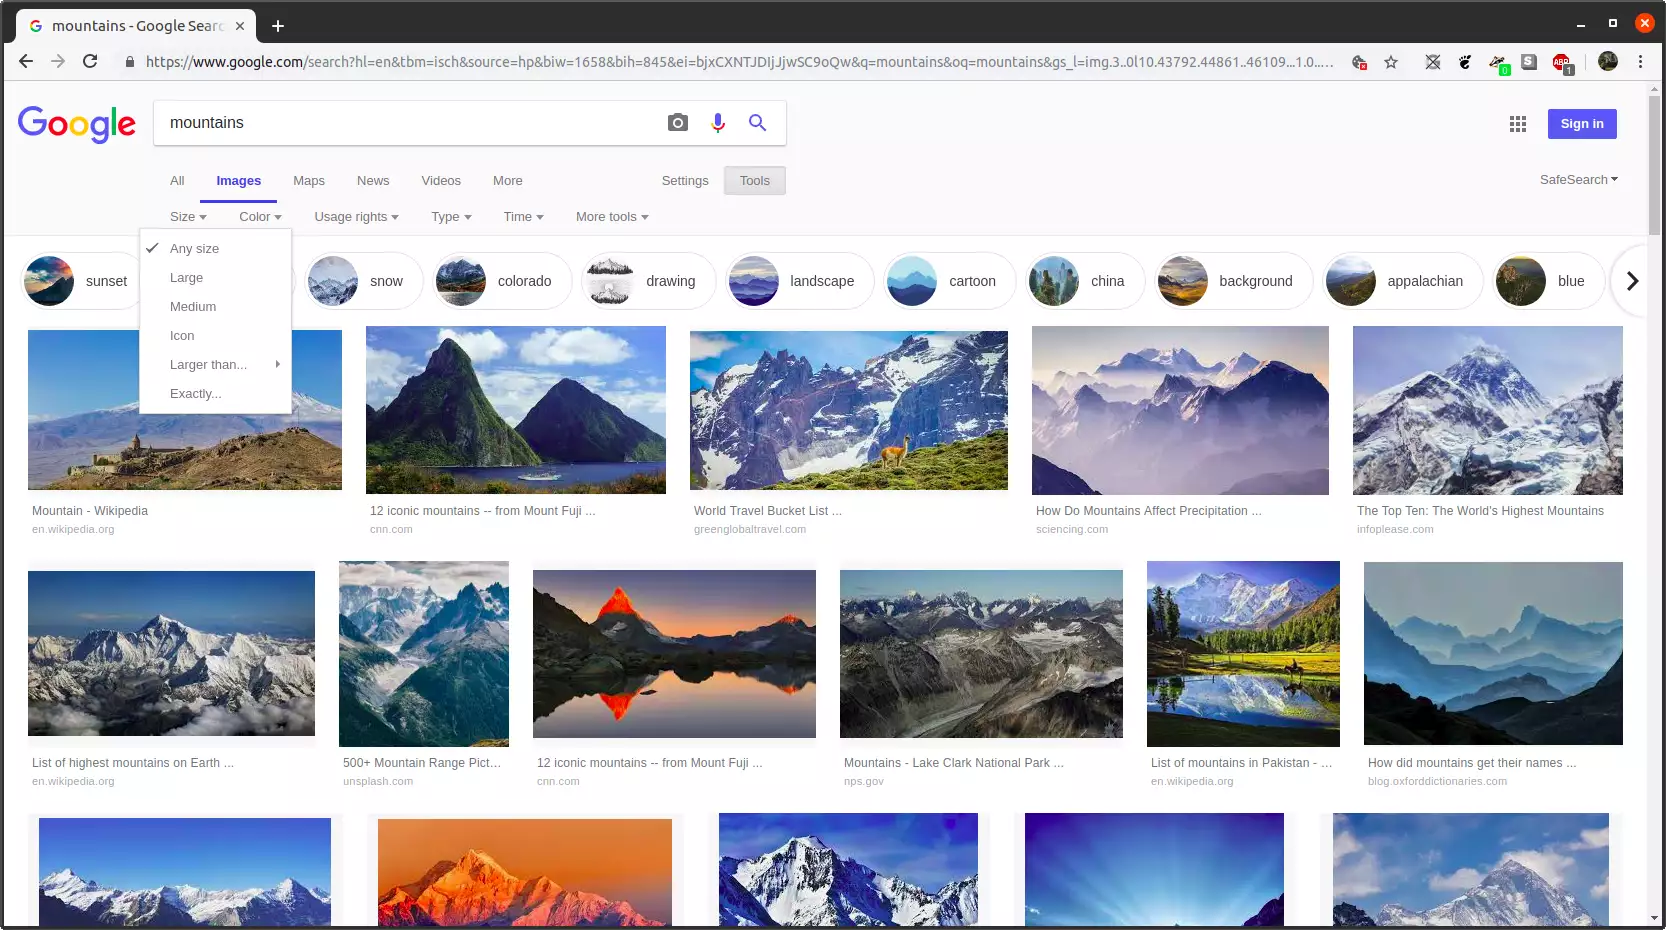 Google Images results page for the search term "mountains" with the Dimensions menu open.